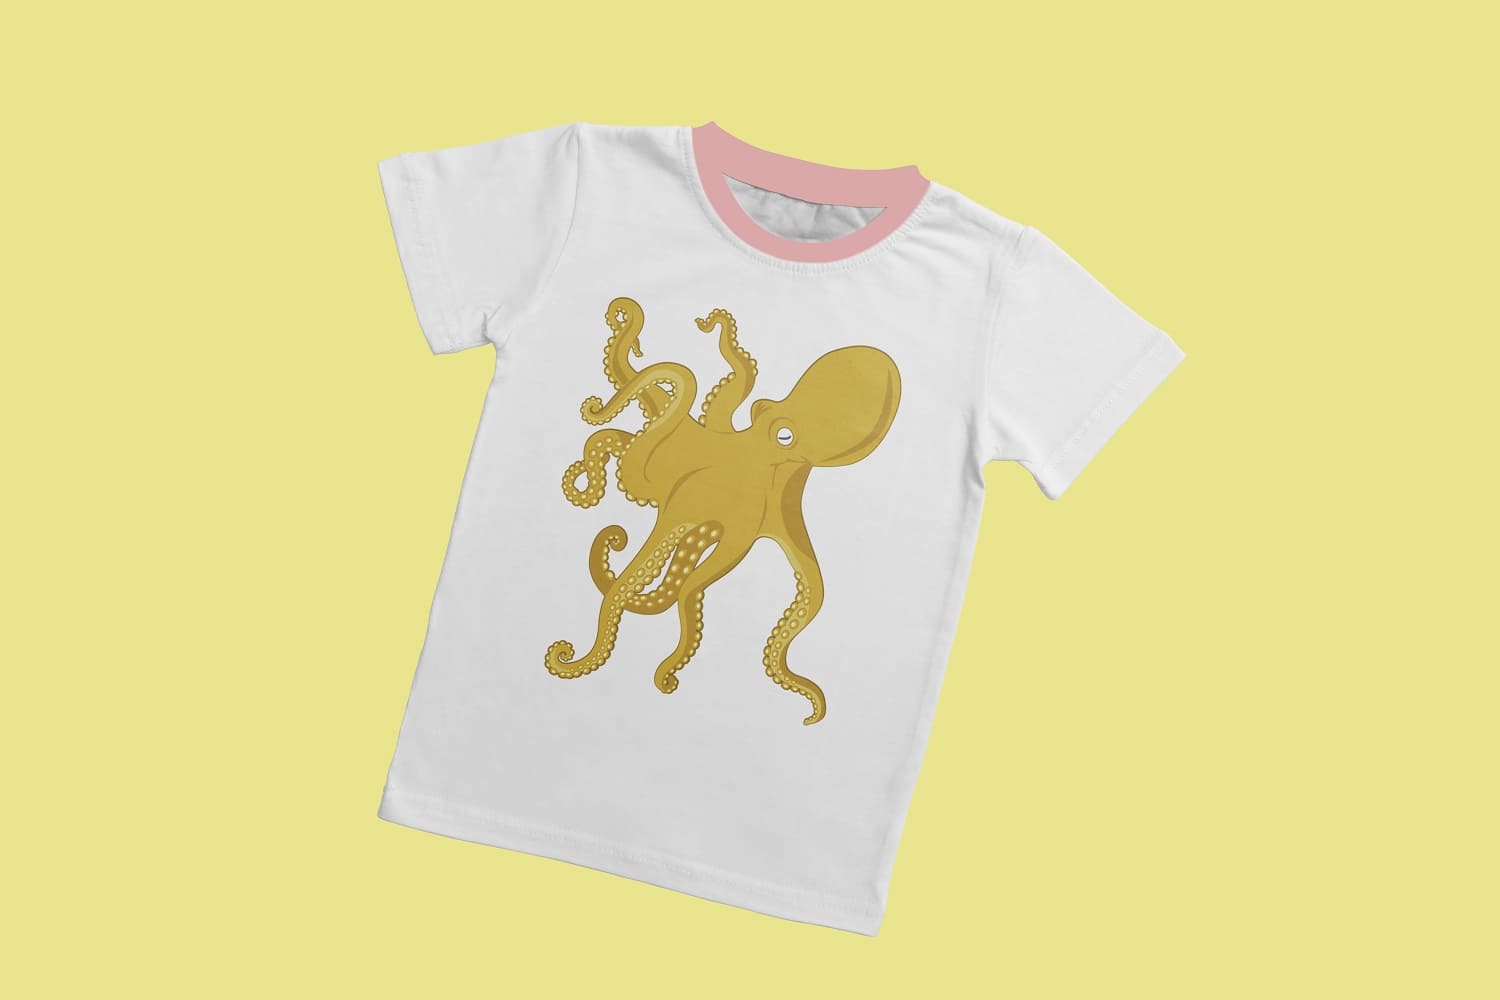 T-shirt with a picture of a yellow octopus on a light yellow background.